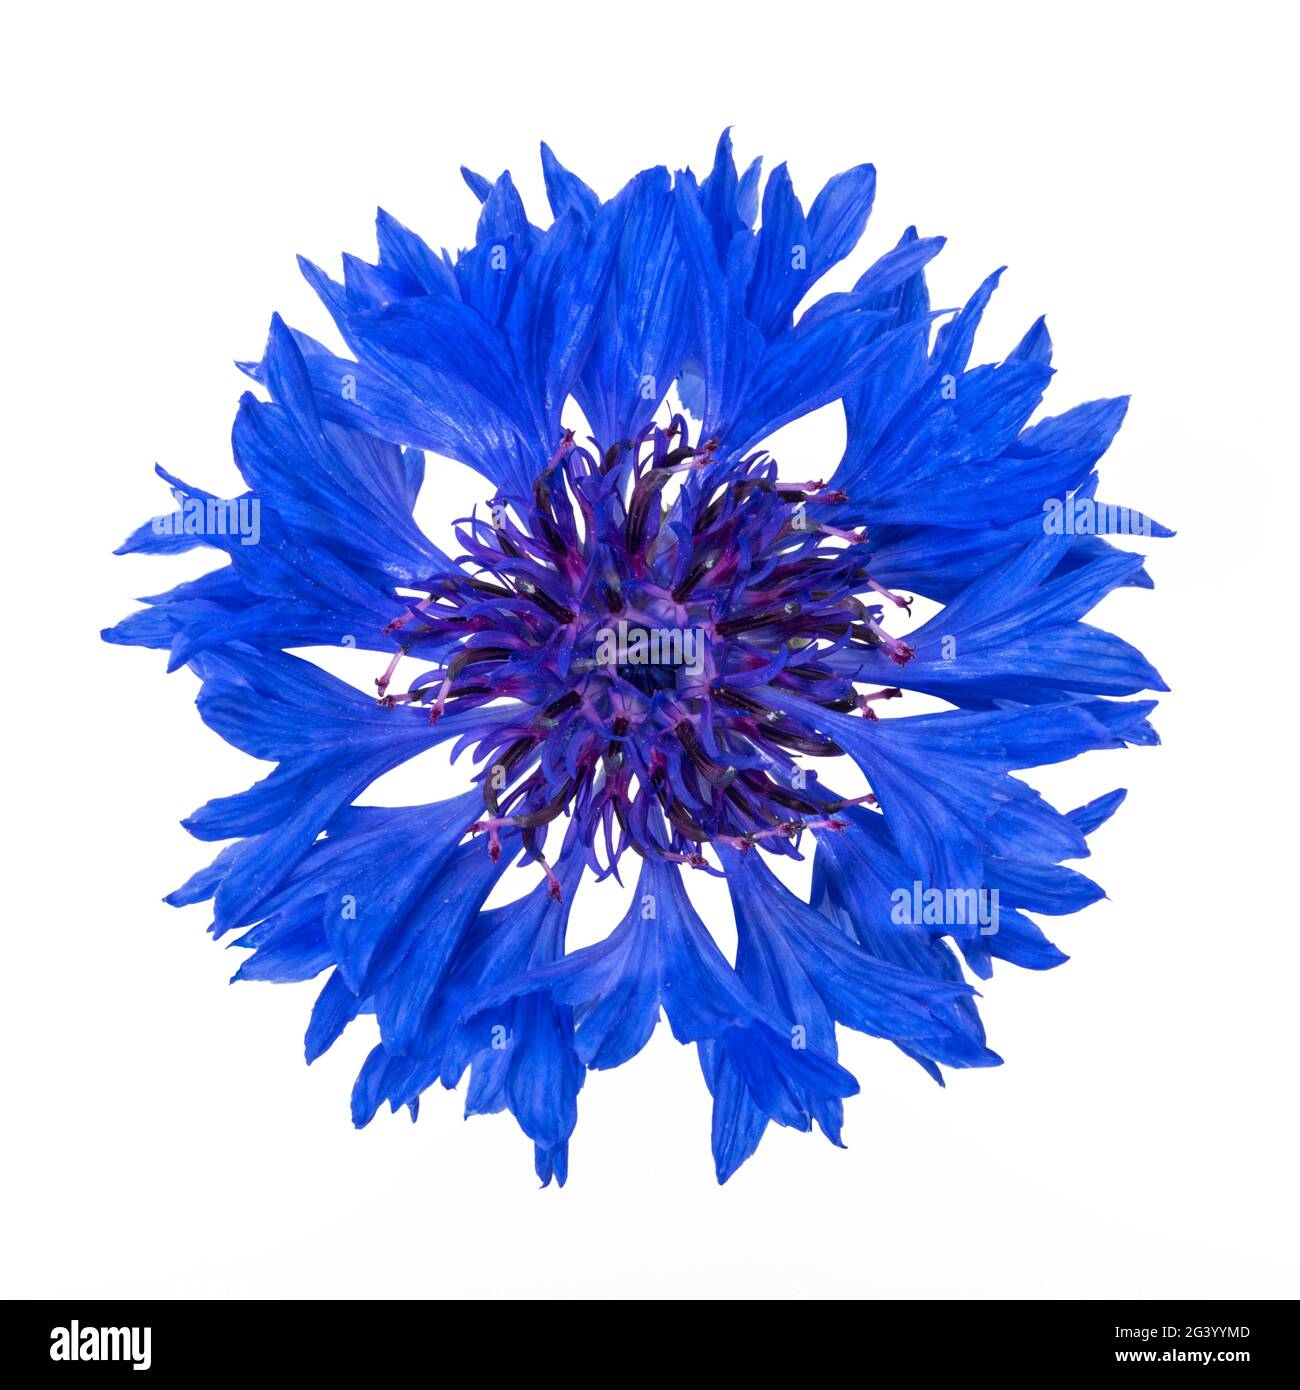 Vibrant blue cornflower blossom top view, isolated on white background Stock Photo